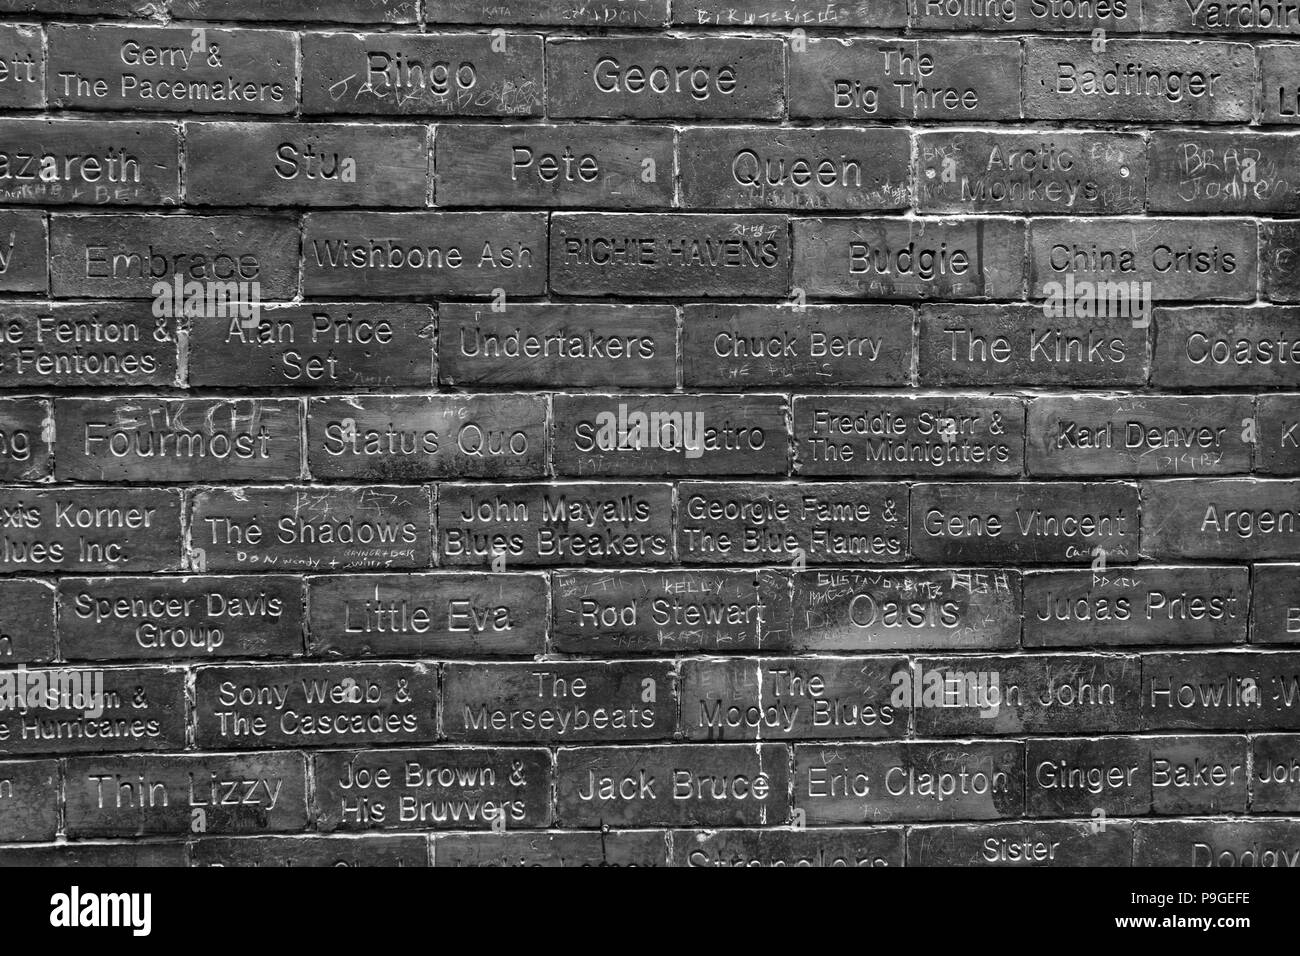 The Wall of Fame outside the Cavern club in Mathew Street, Liverpool City, Merseyside, England, UK Stock Photo